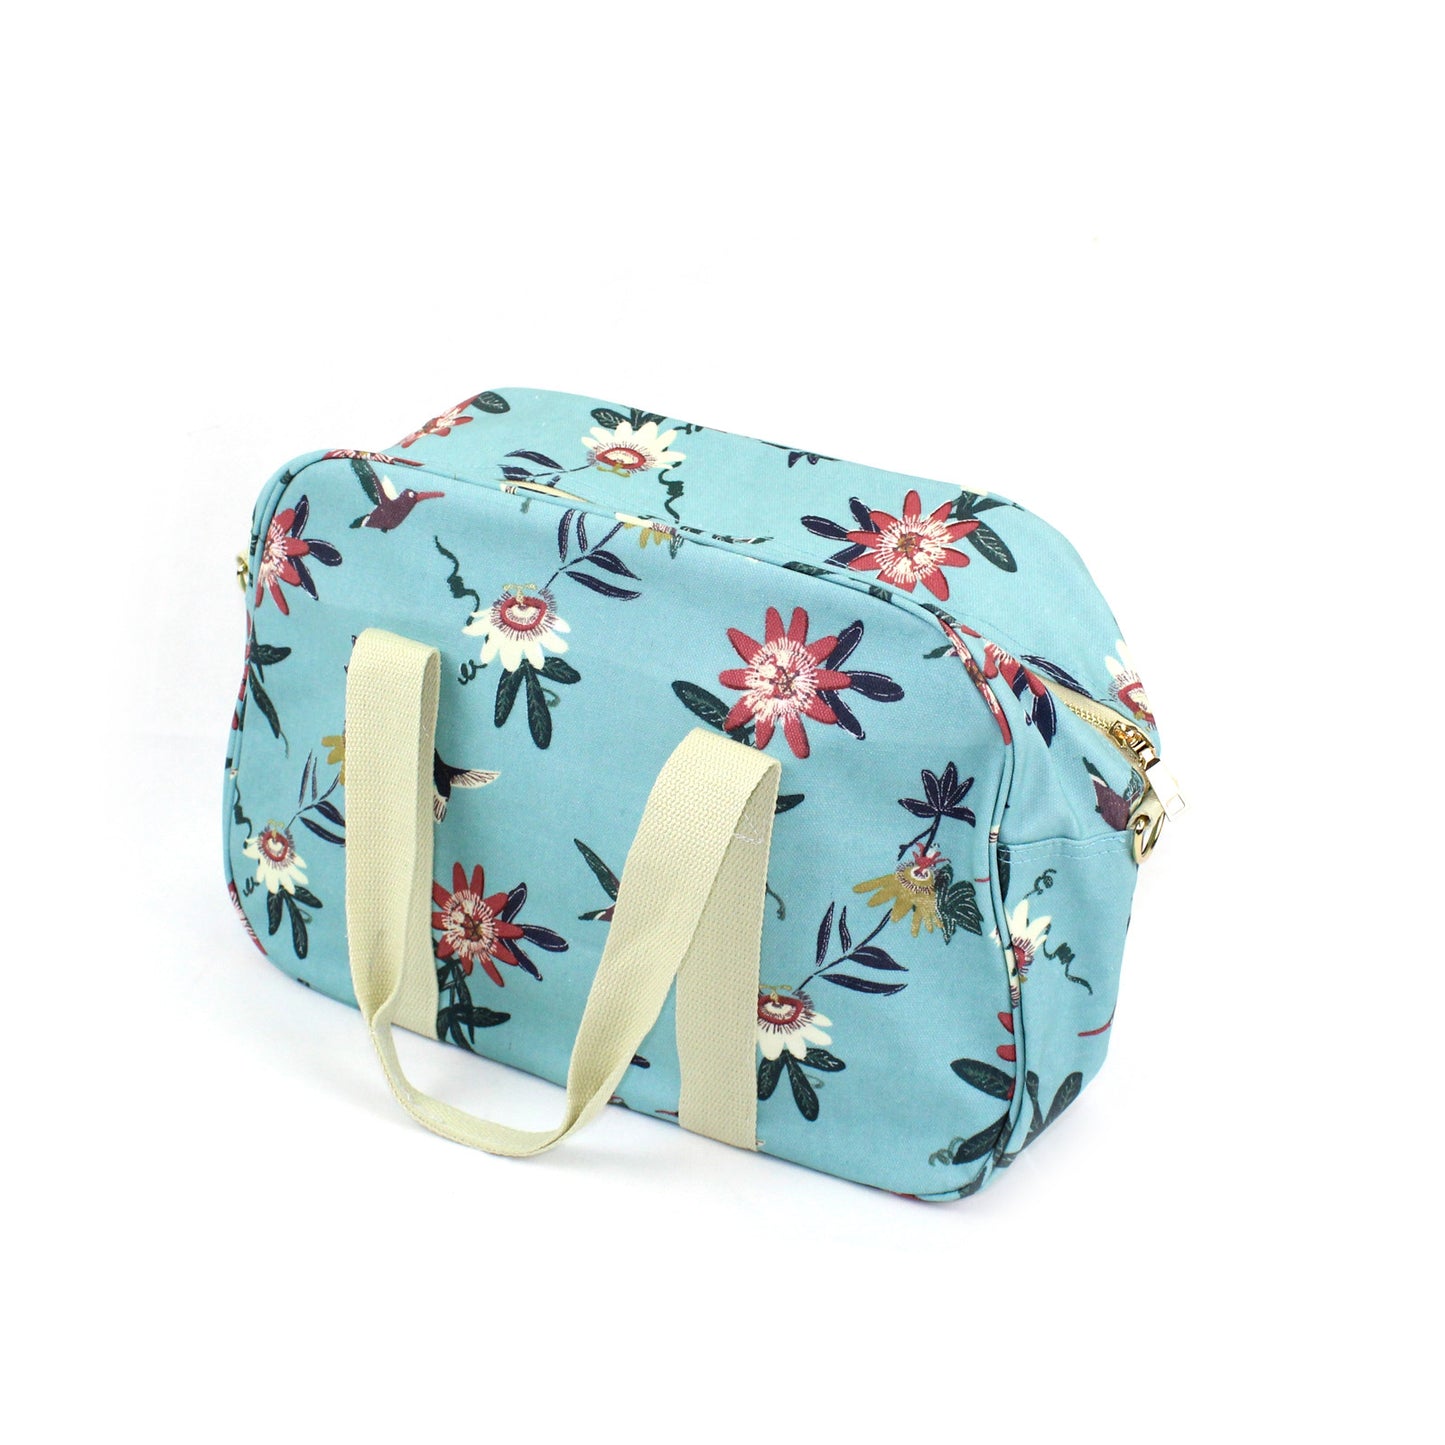 Passionflower weekend oilcloth bag